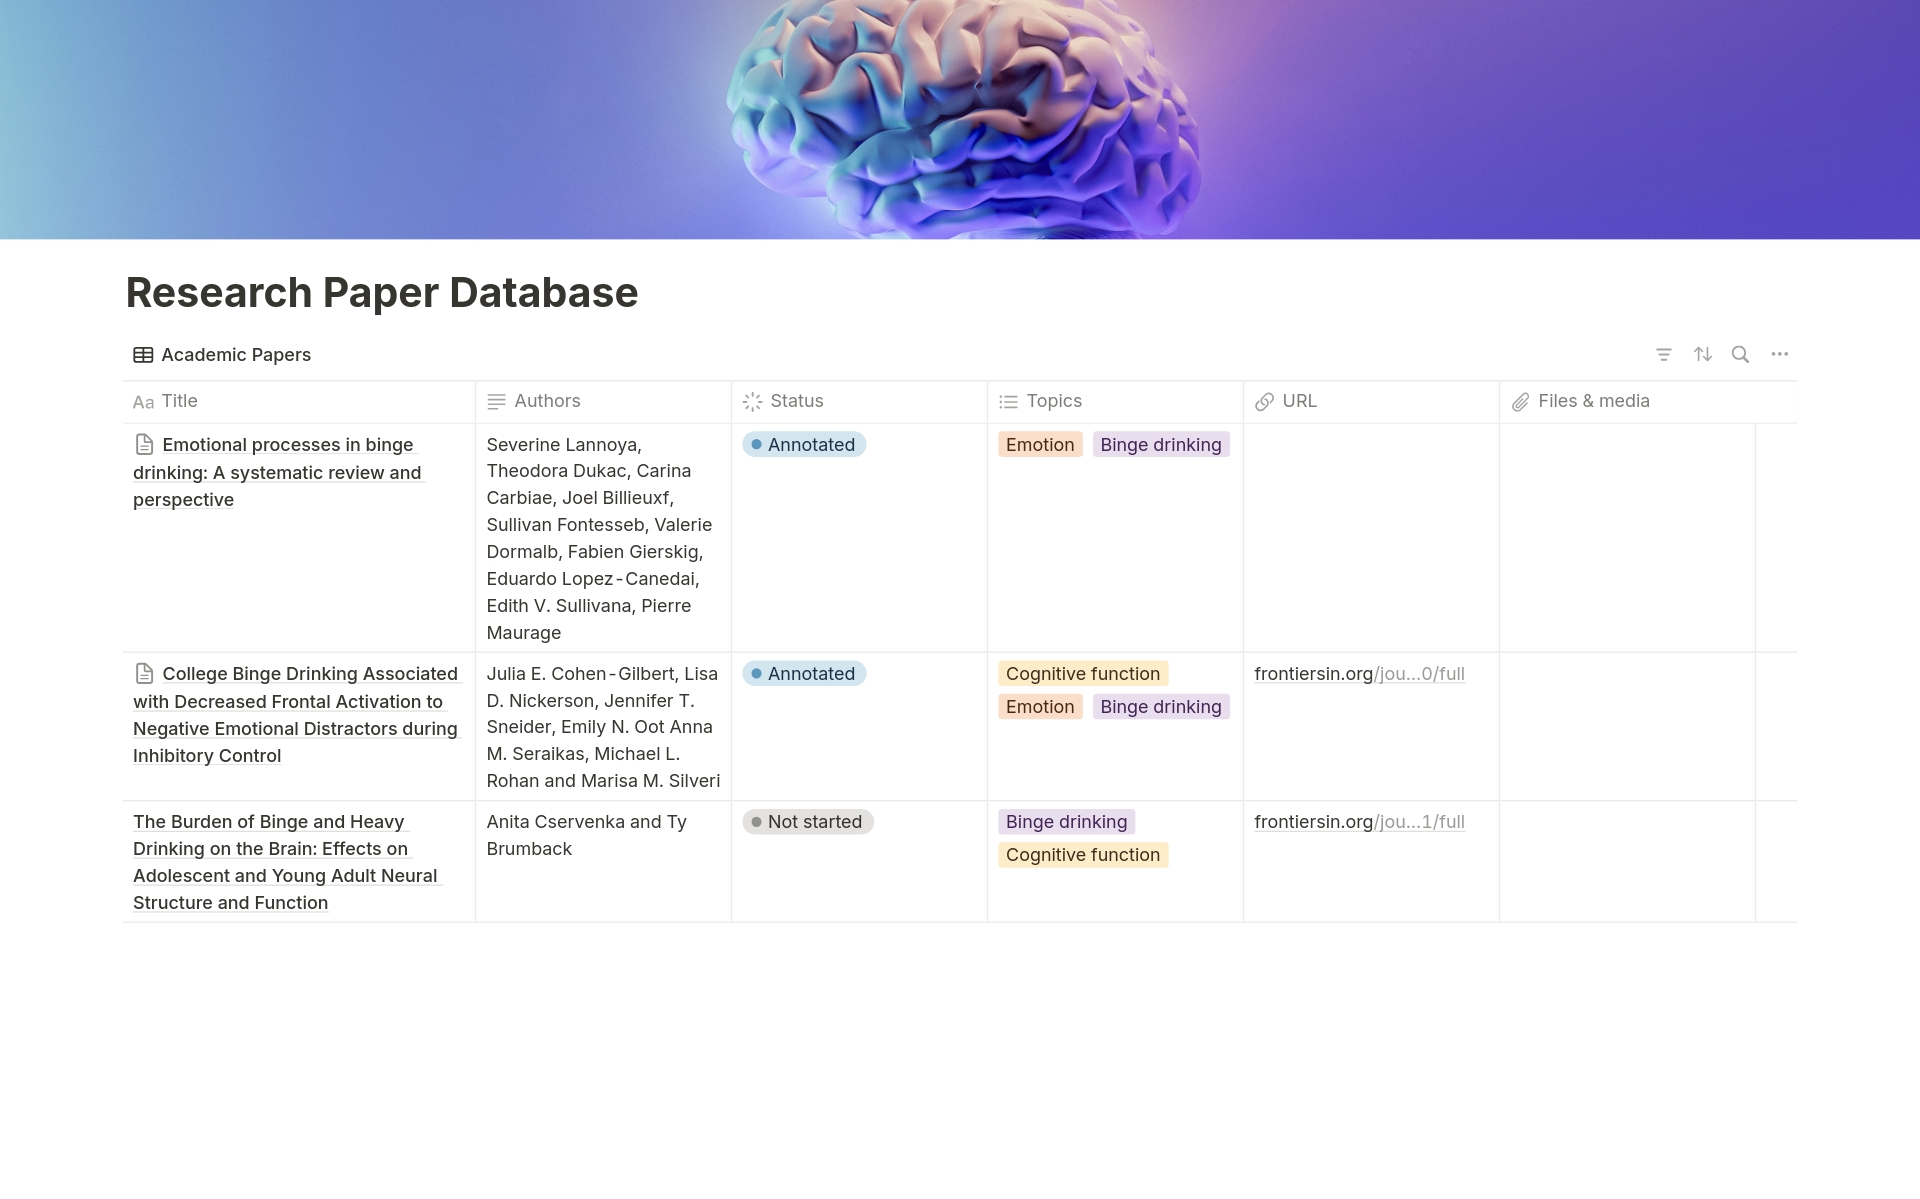 Simplify your research process with our Notion Research Paper Database template! Track research papers, monitor reading status, and take detailed notes—all in one place.